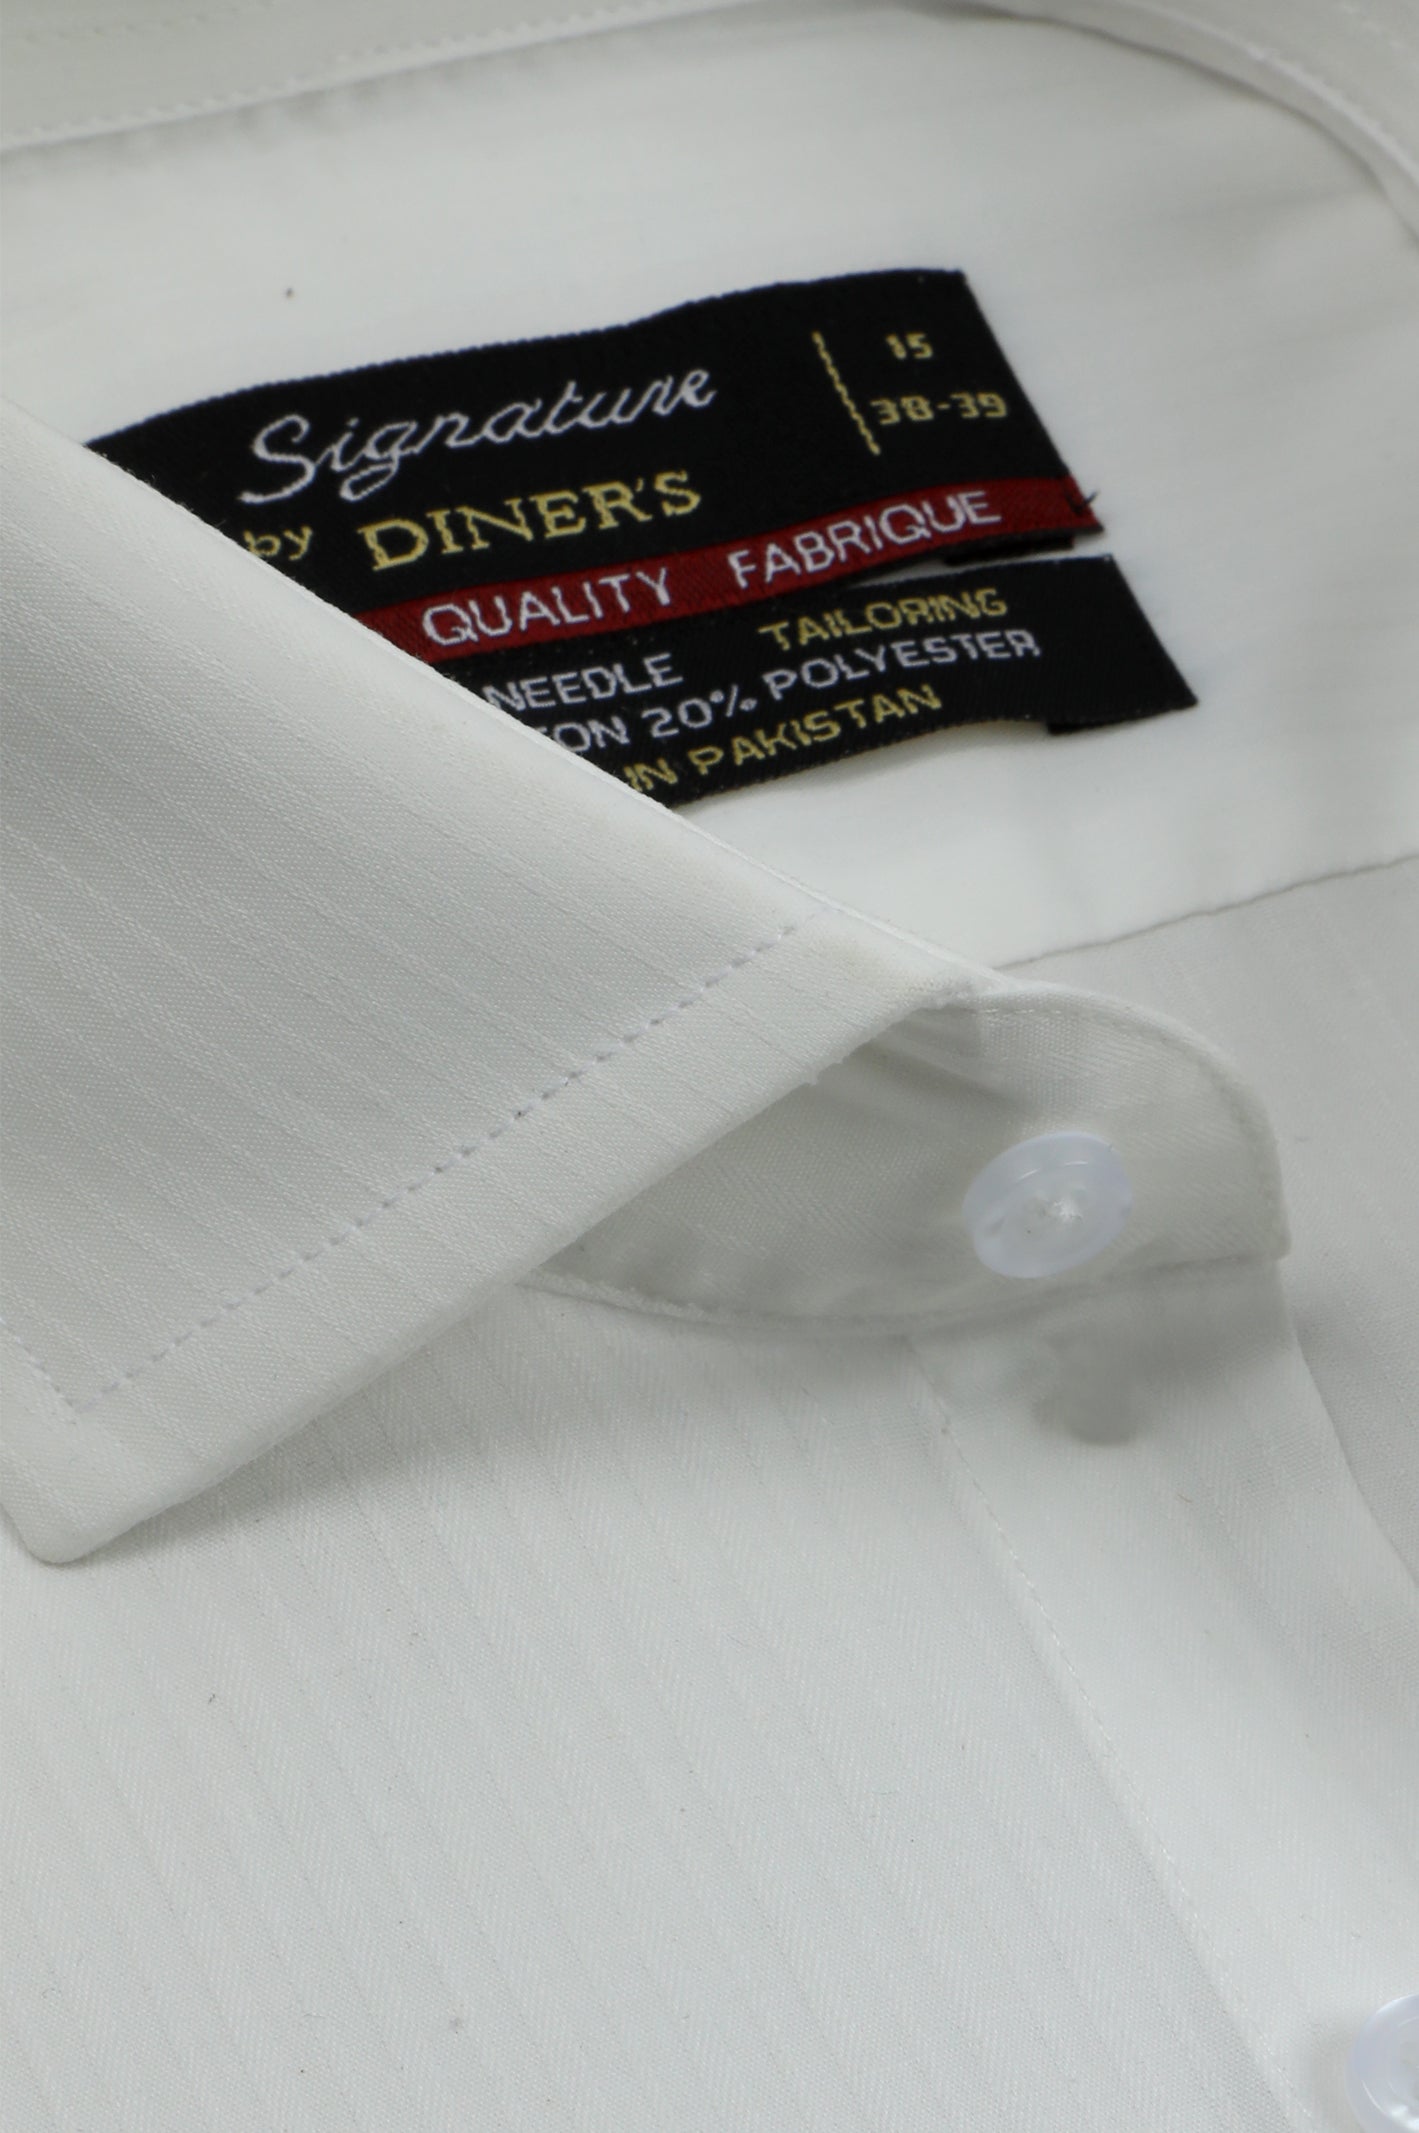 Formal Men Shirt in offwhite SKU: AB25438-OFFWHITE - Diners